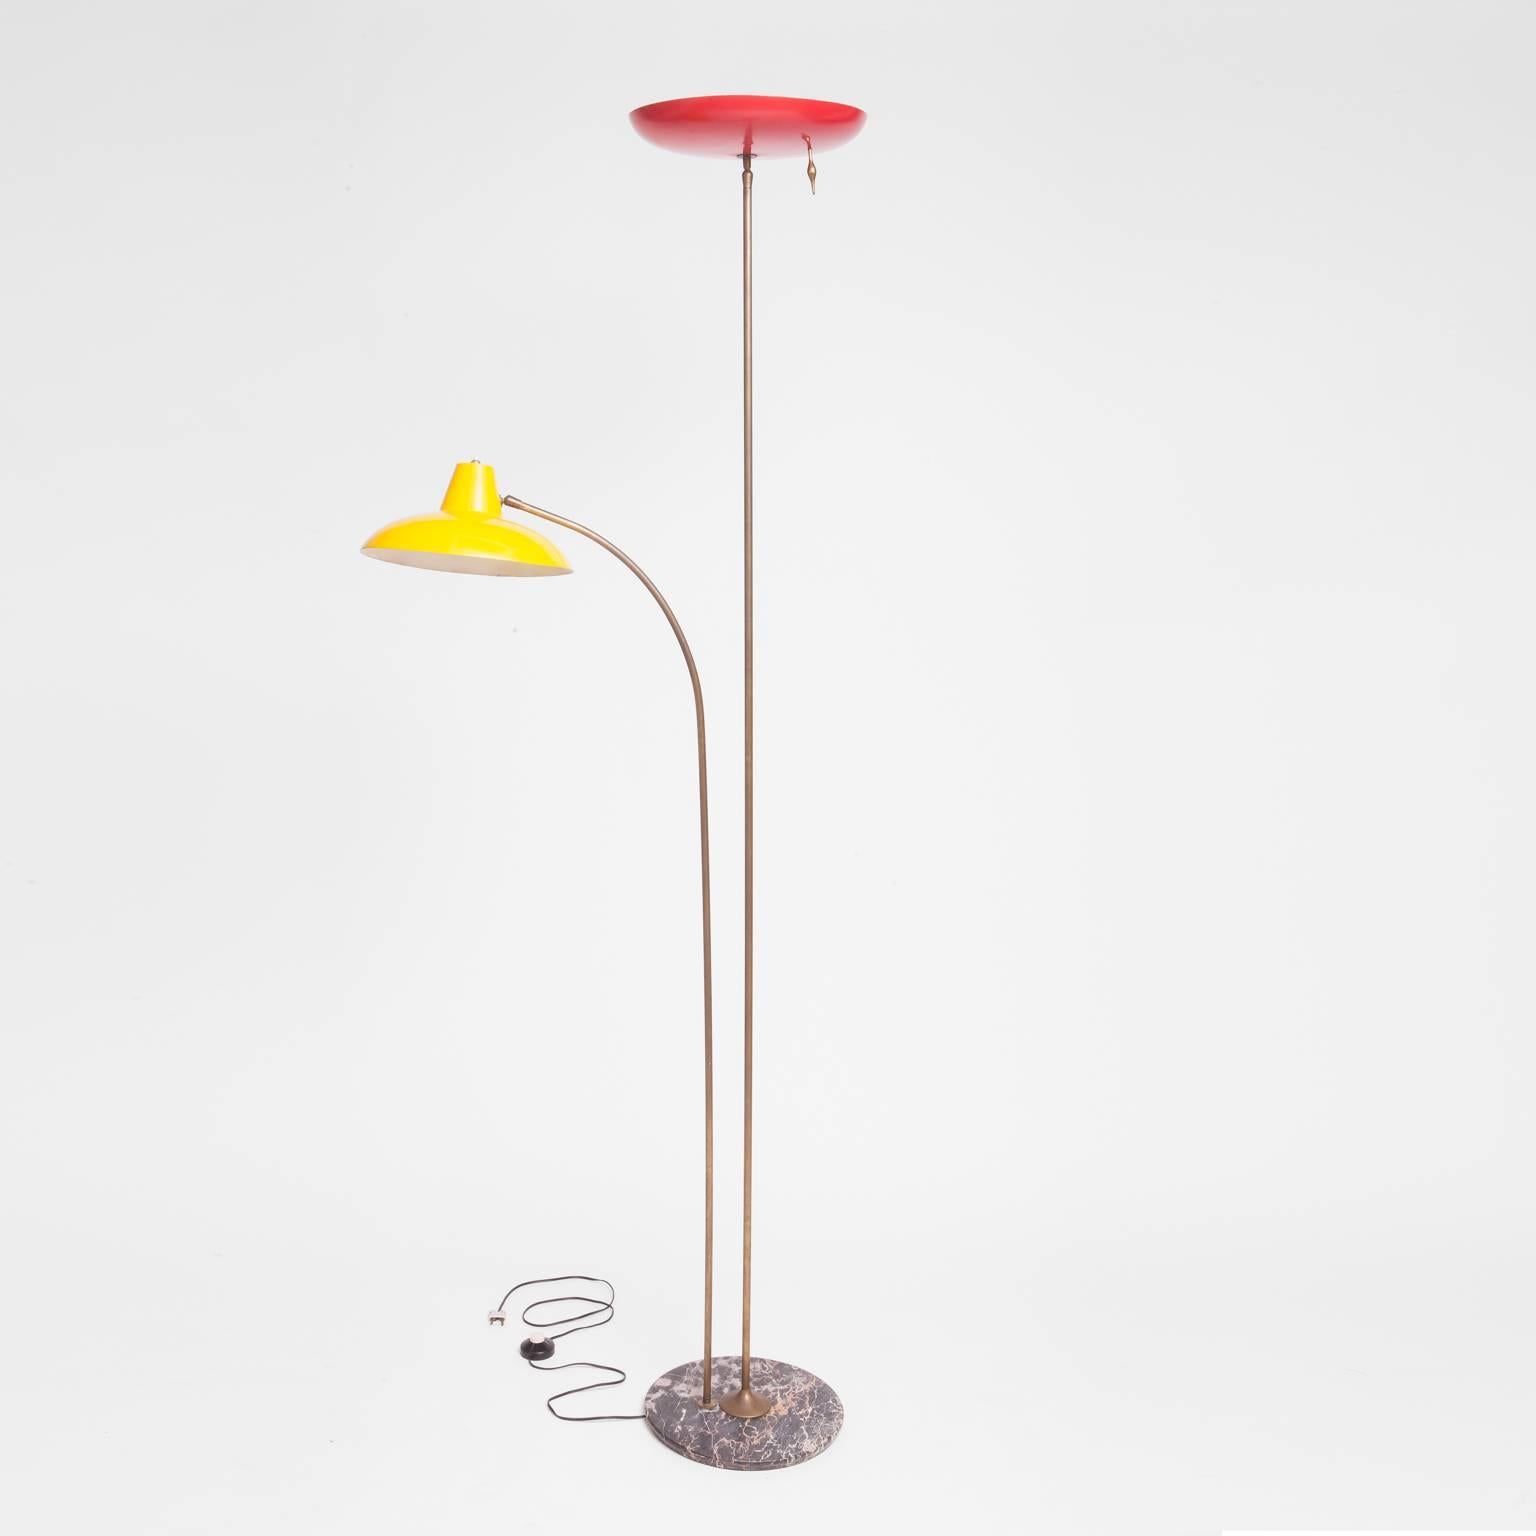 Yellow and red rounded shade, 1950s standing lamp in good working condition. European plug. Brass stem, marble base. Probably Italian. Foot switch also with the option to switch on/off on the top of the yellow light.